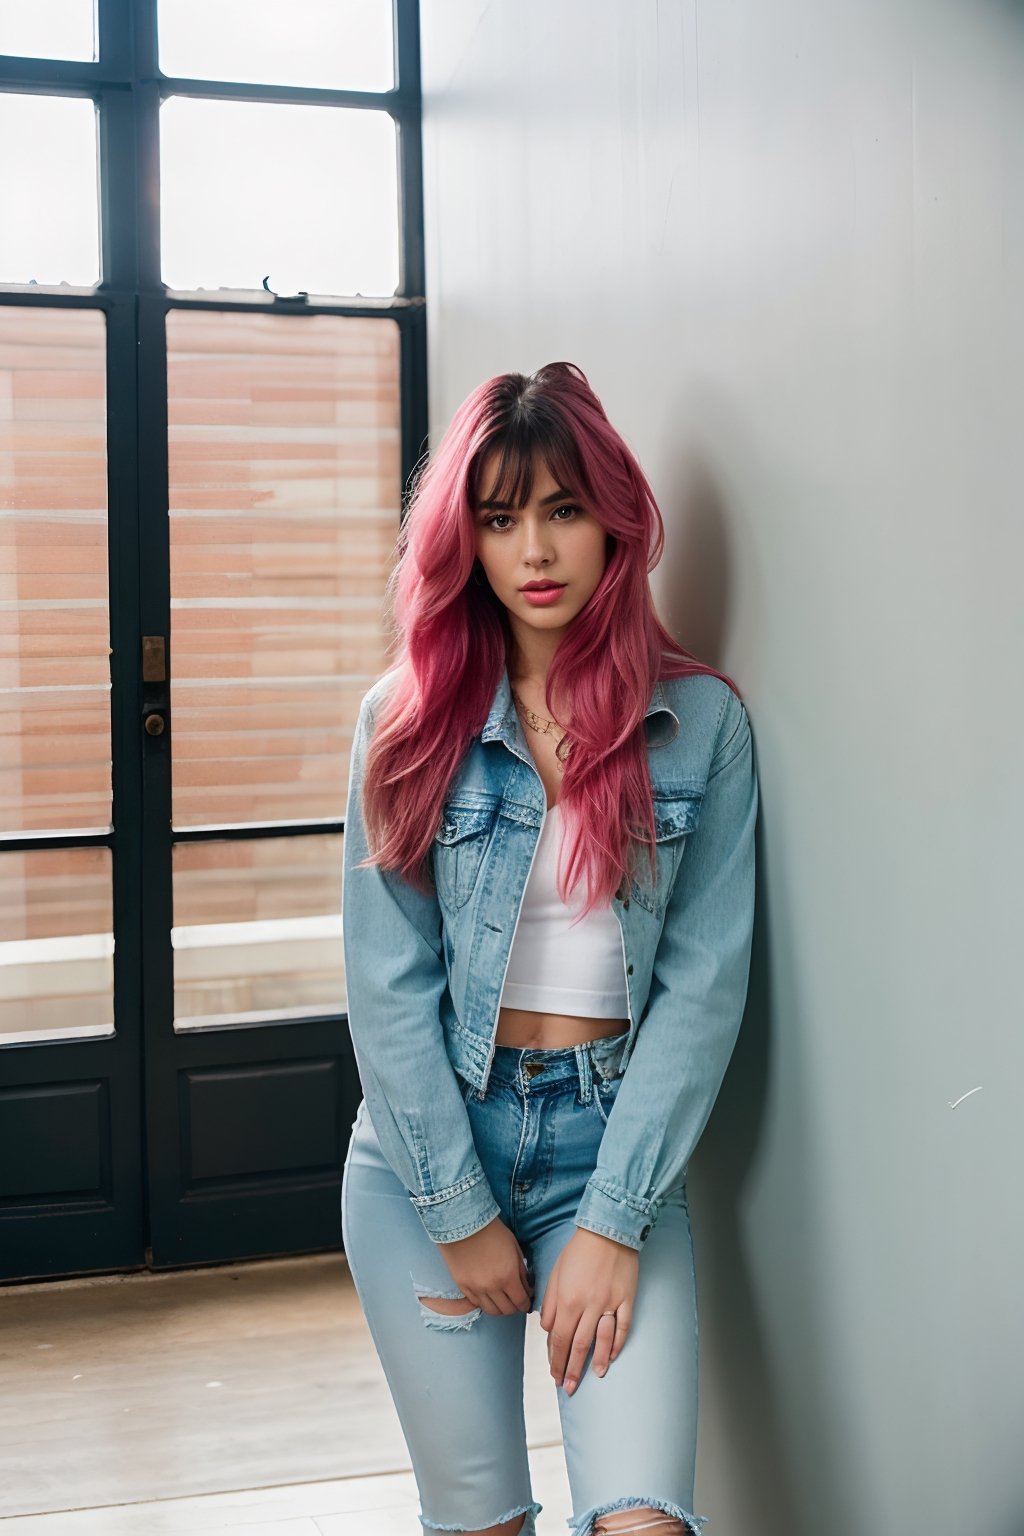 long hair with ponytail and fringe, beautiful face, onlyfans model, hot pink lips, pink eyeshadow, wearing cropped denim jacket and tight levis jeans in light blue color,blackbootsnjeans, white girl